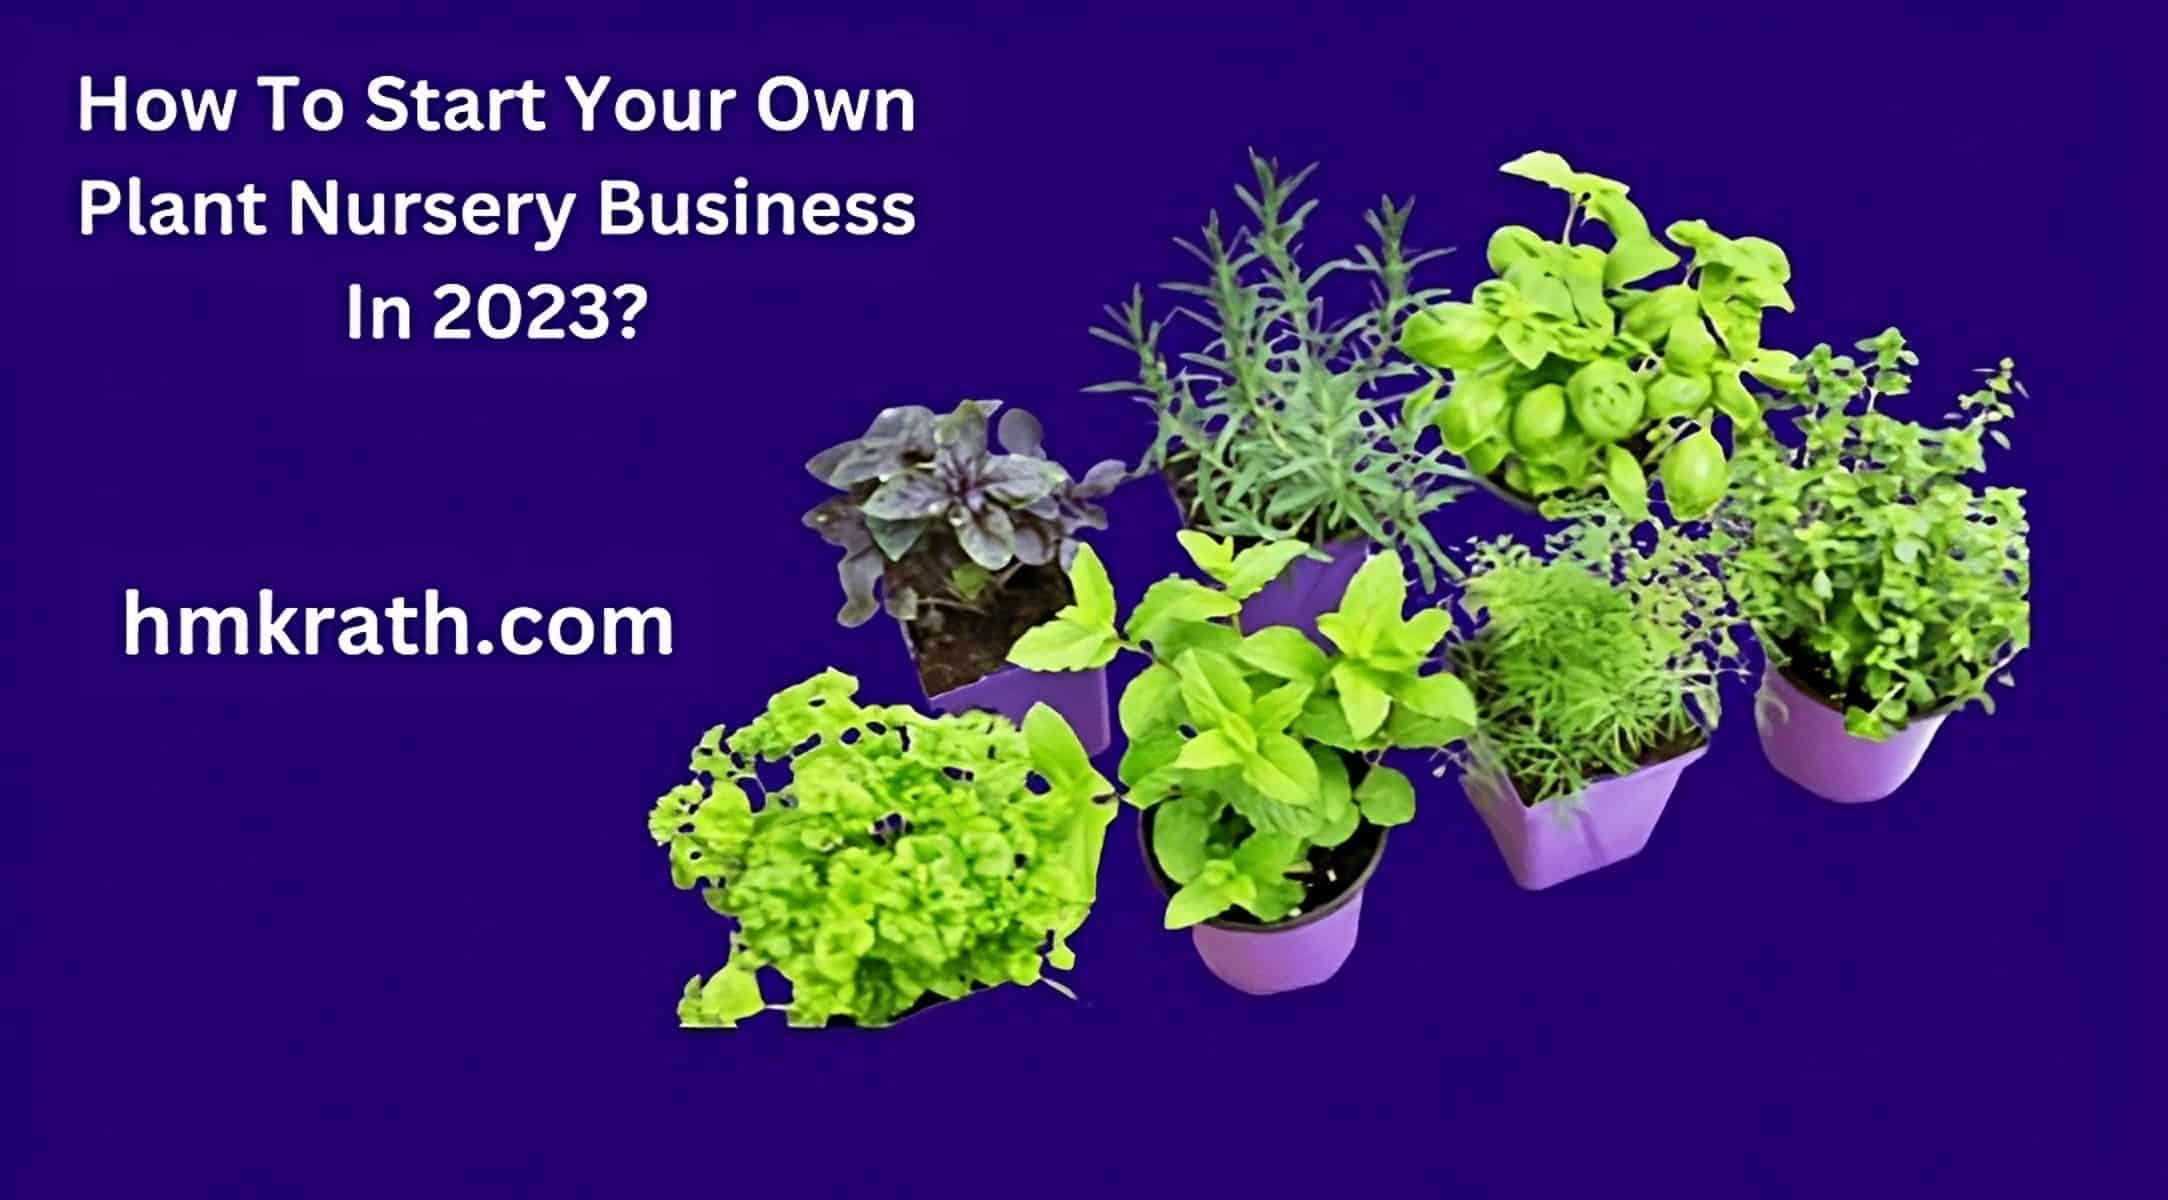 How To Start Your Own Plant Nursery Business In 2023